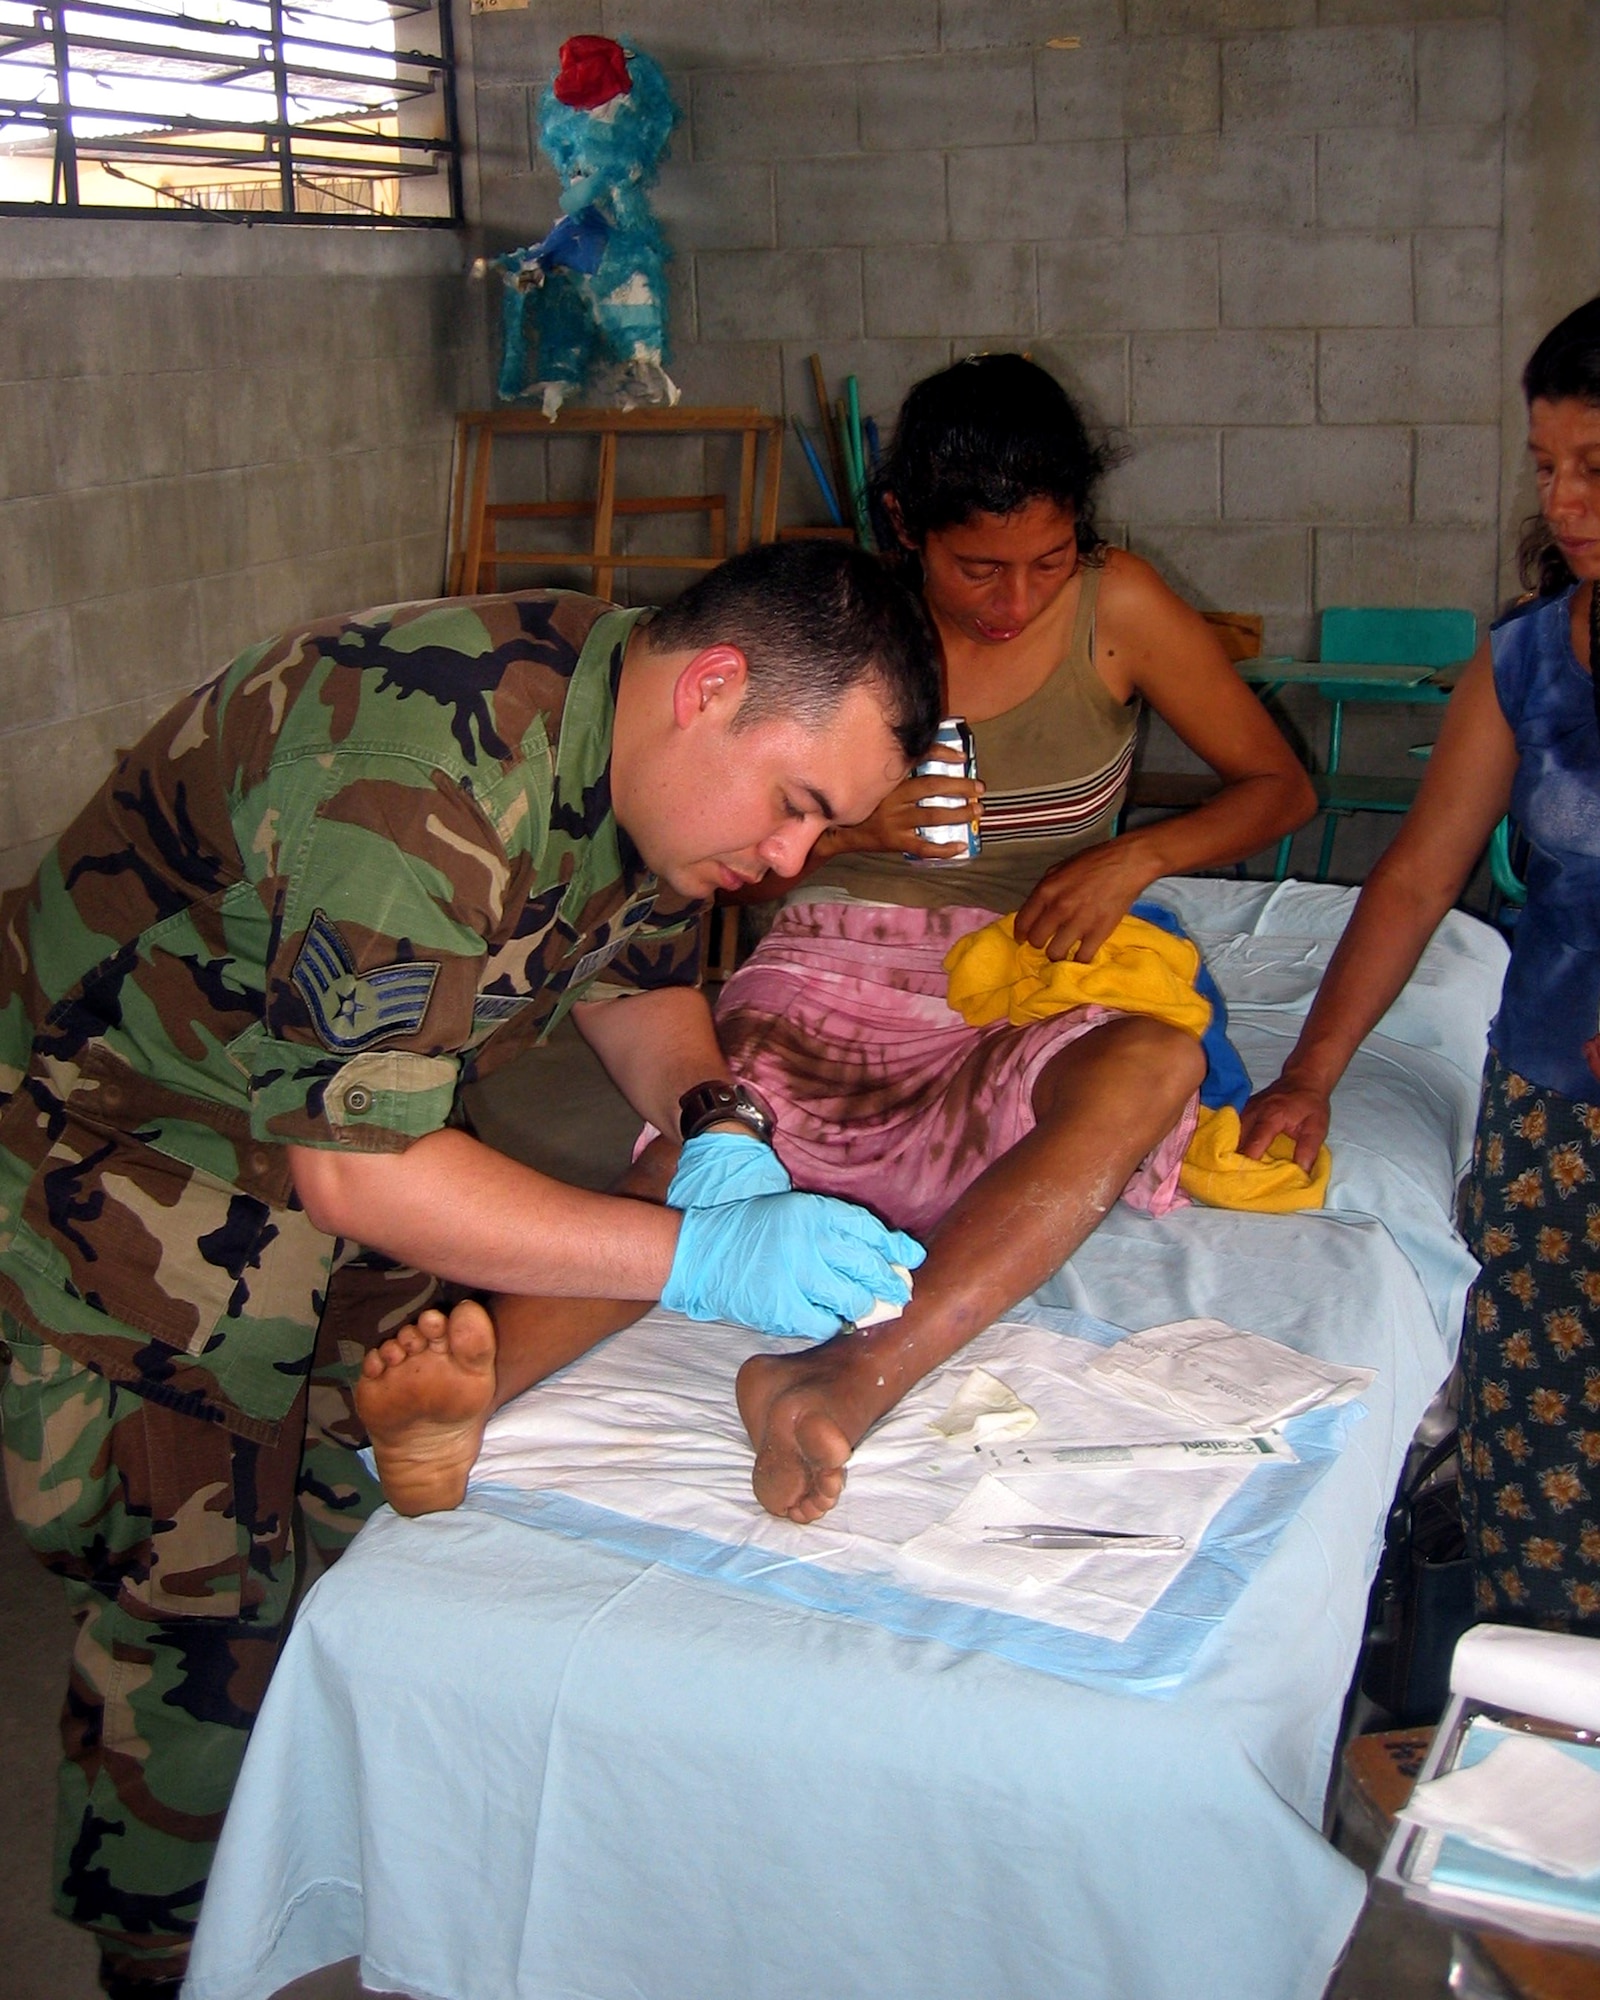 Staff Sgt. Oscar Hernandez, a public health technician, disinfects a woman's leg during a humanitarian mission in some of the poorest regions of Guatemala. In April, Sergeant Hernandez from Vandenberg Air Force Base, Calif., and another 12 Airmen from various Air Force Space Command bases, saw more than 8,000 patients in 10 days. (U.S. Air Force photo)